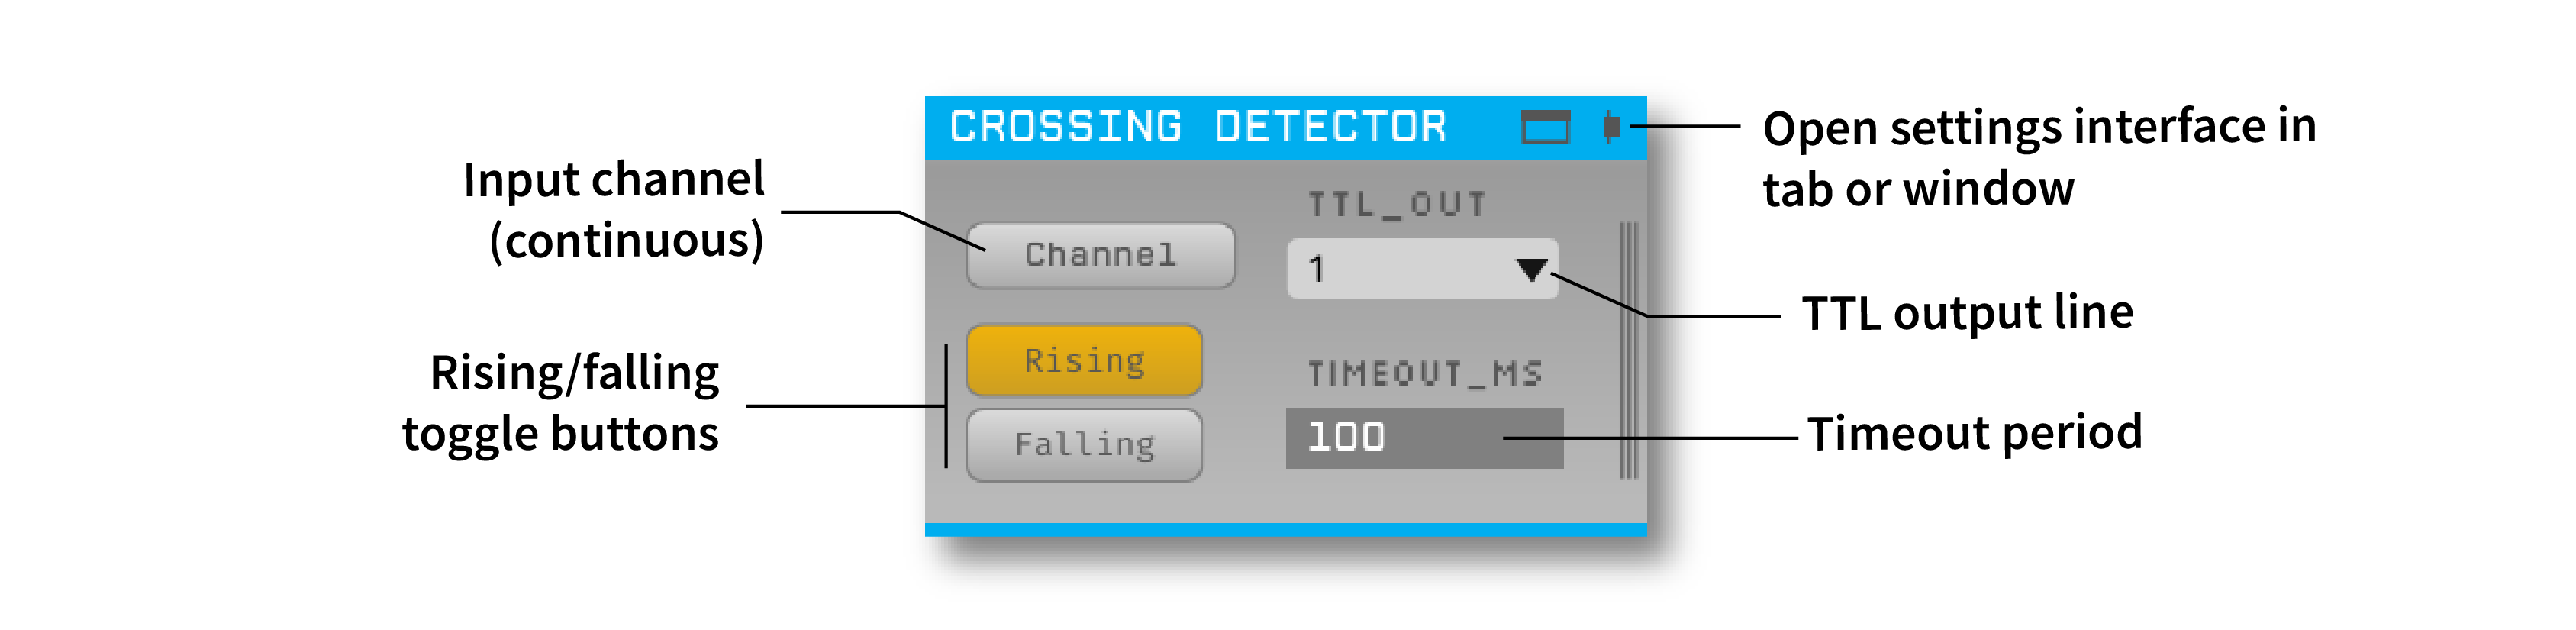 Annotated Crossing Detector editor